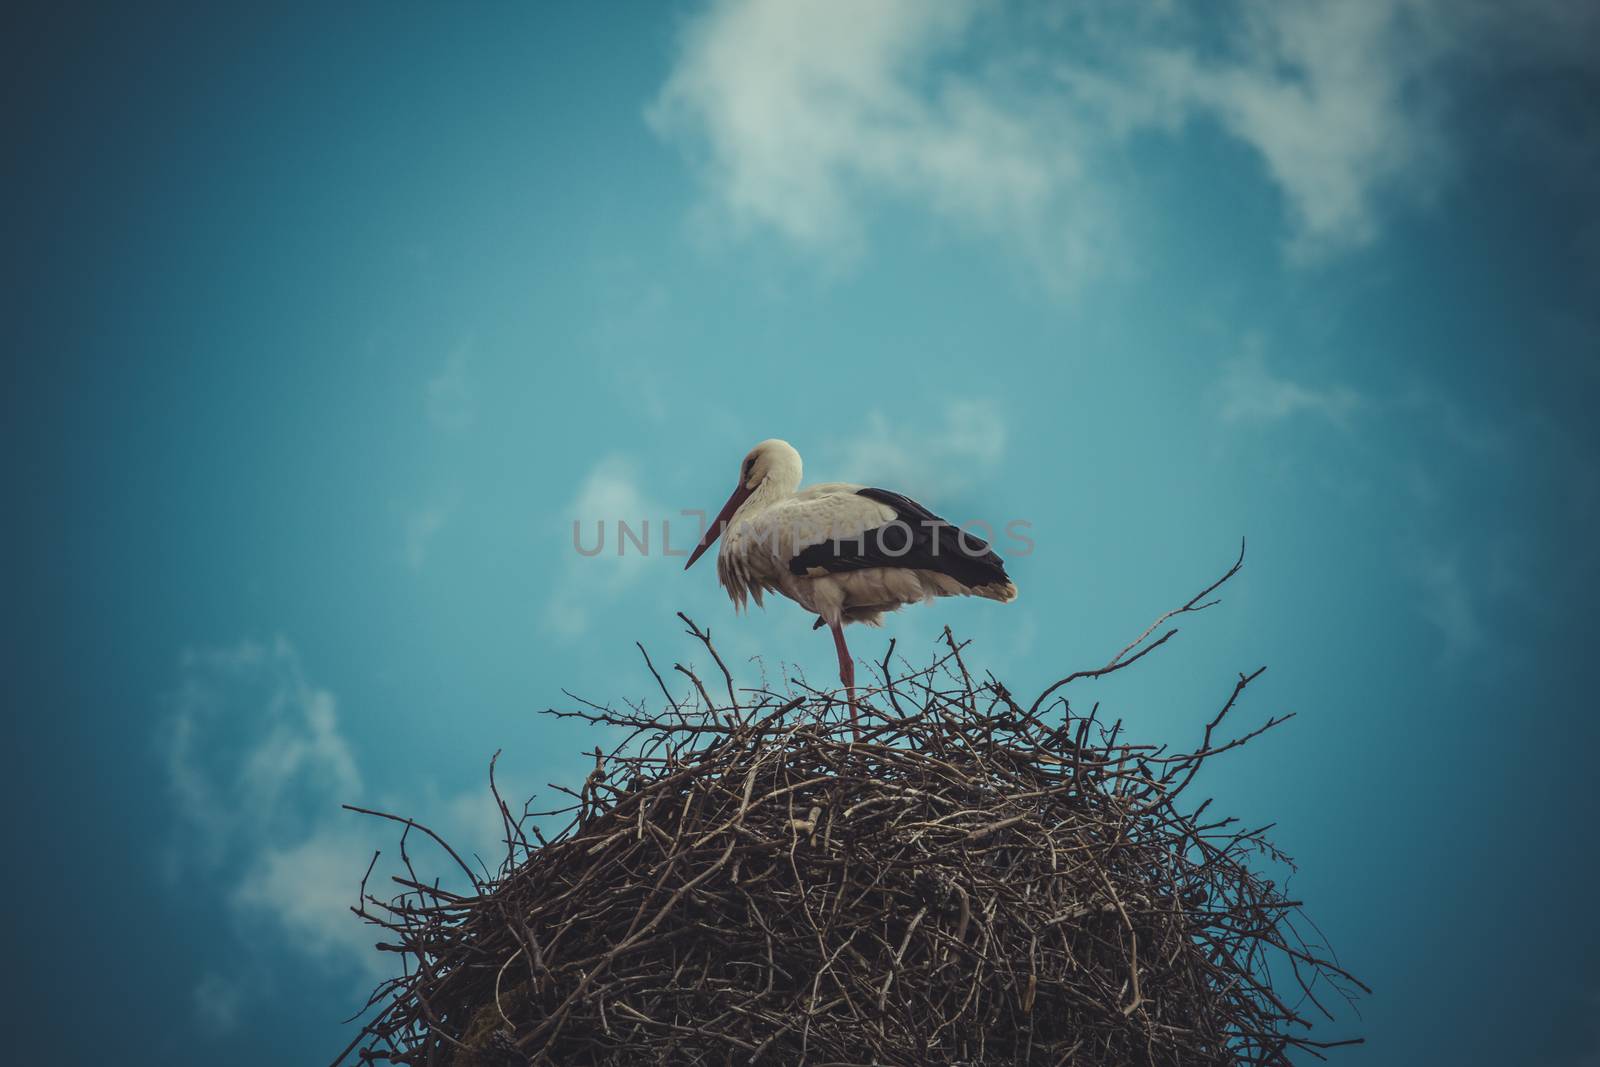 Season, Stork nest made ������of tree branches over blue sky in by FernandoCortes